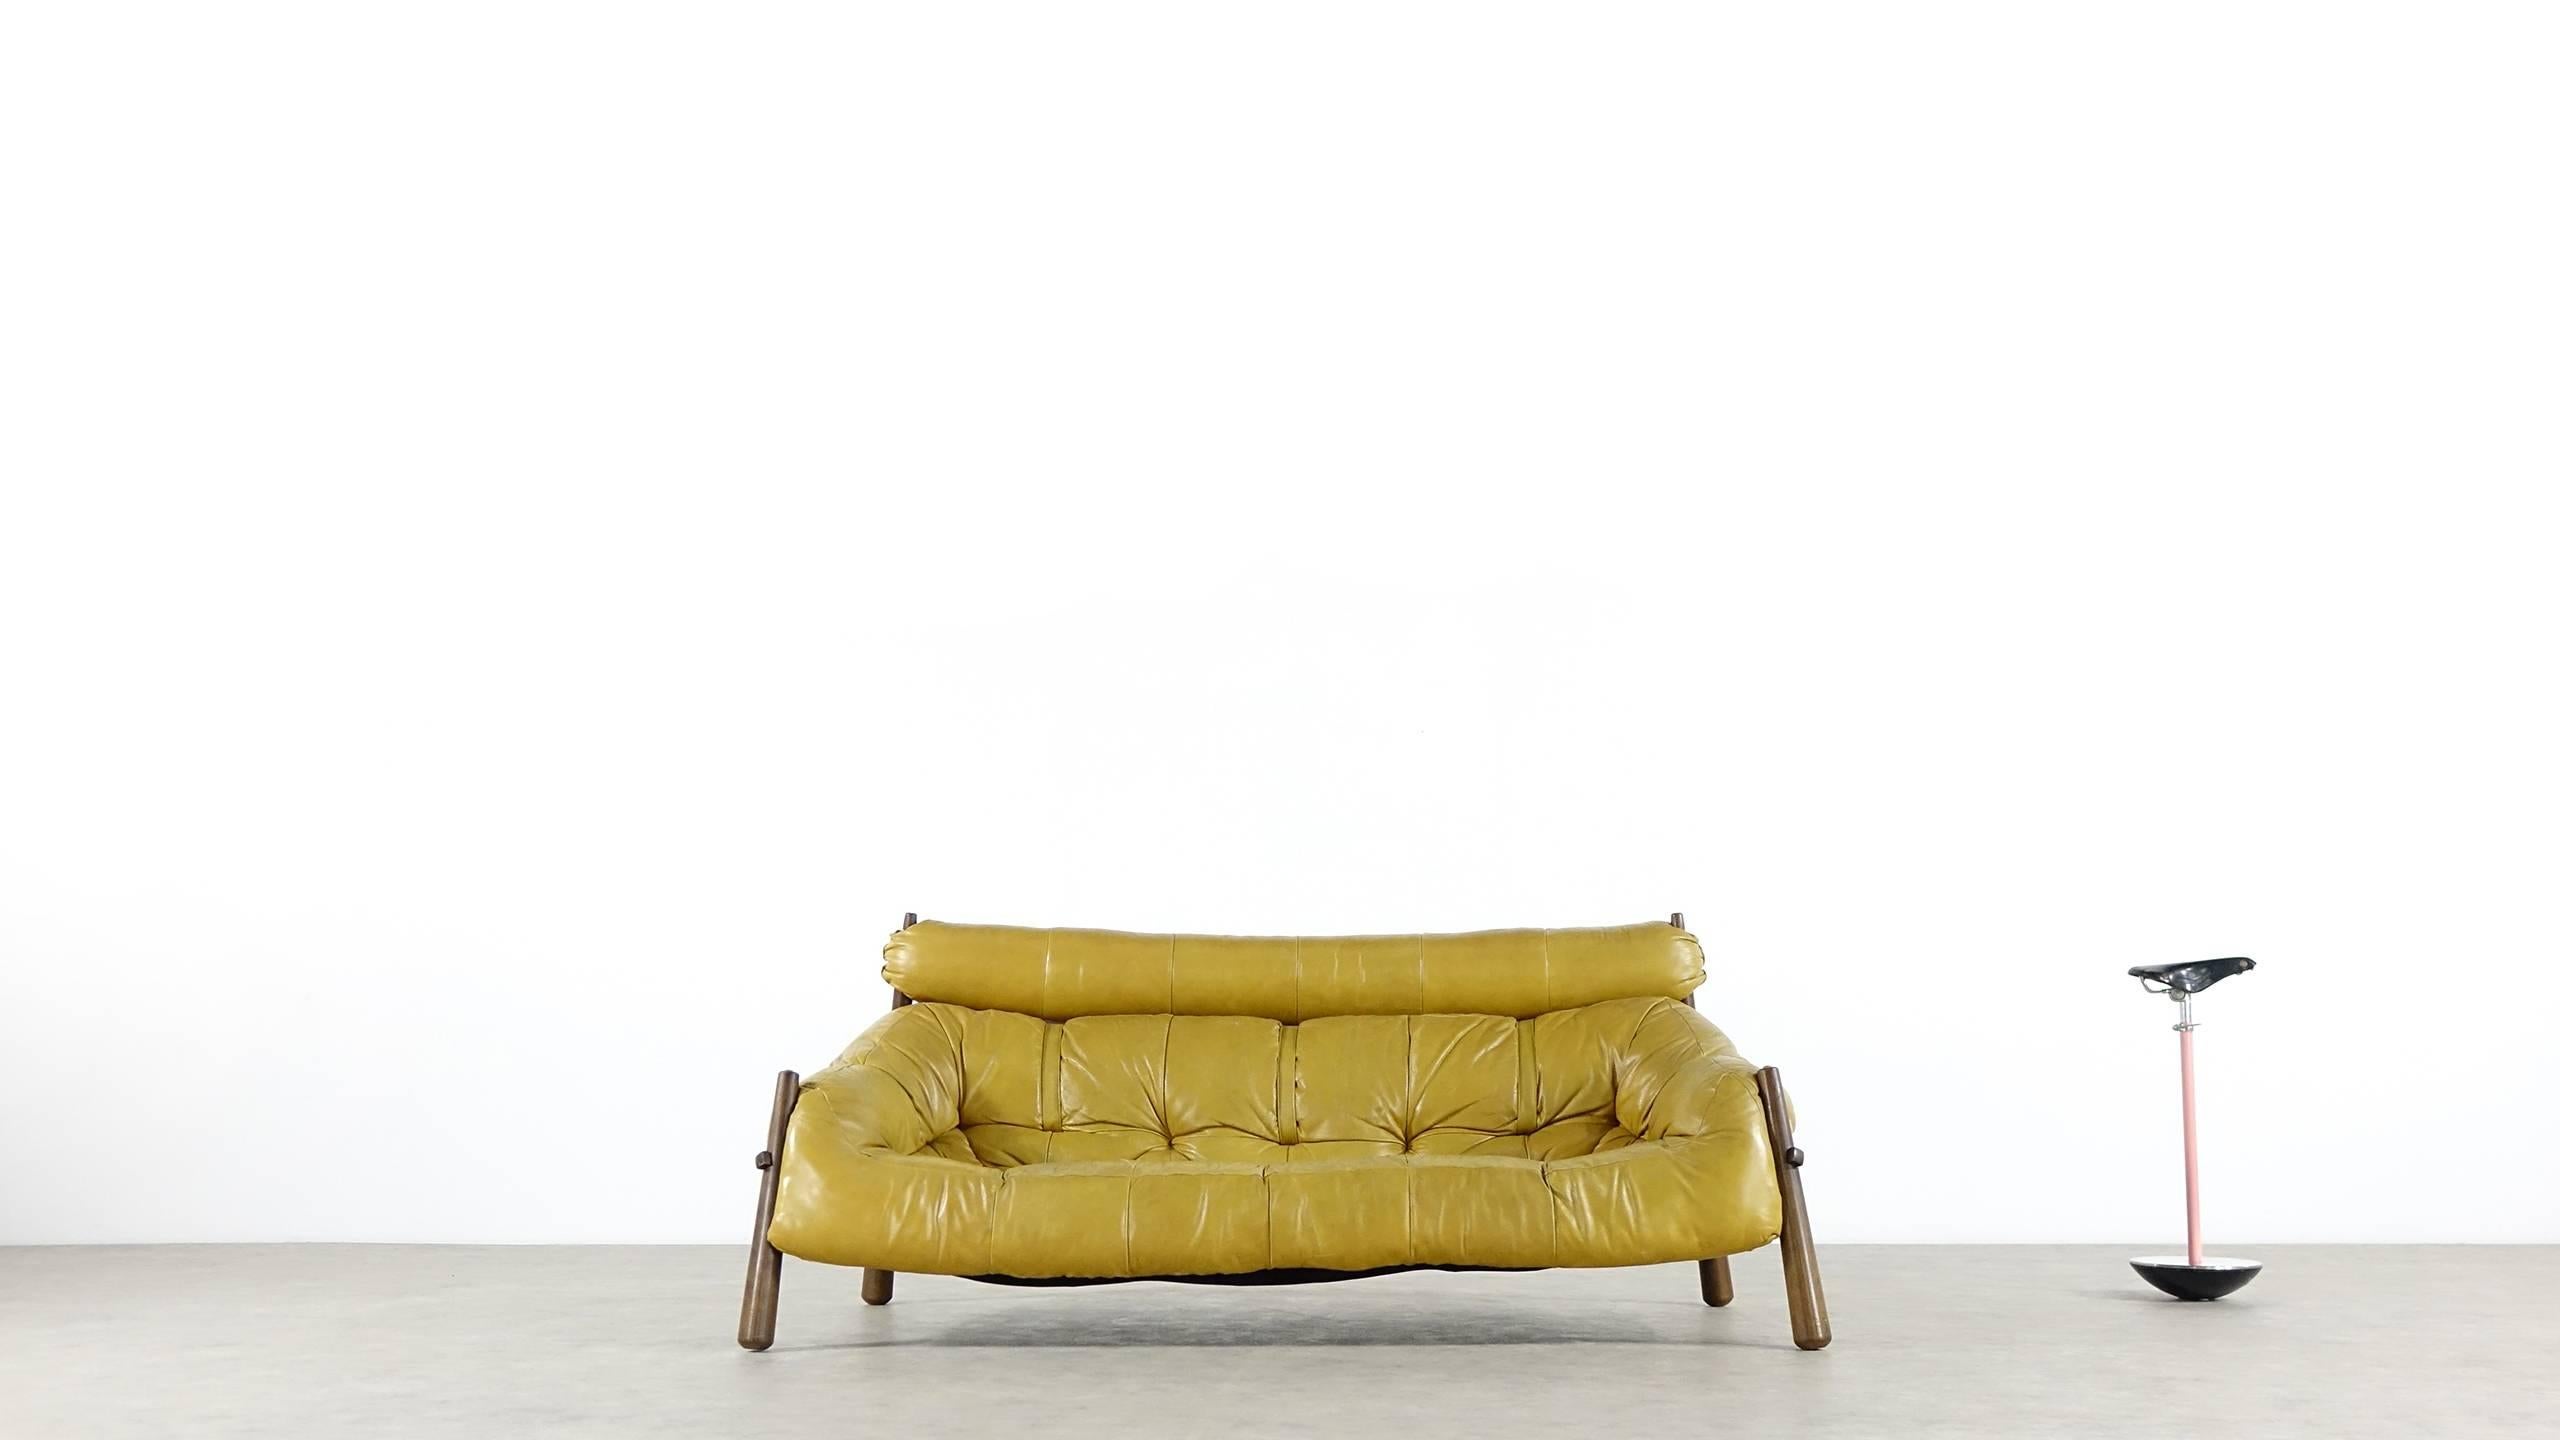 Brazilian Lounge Three-Seat Sofa by Percival Lafer for Lafer S.A. 1958 In Excellent Condition In Munster, NRW